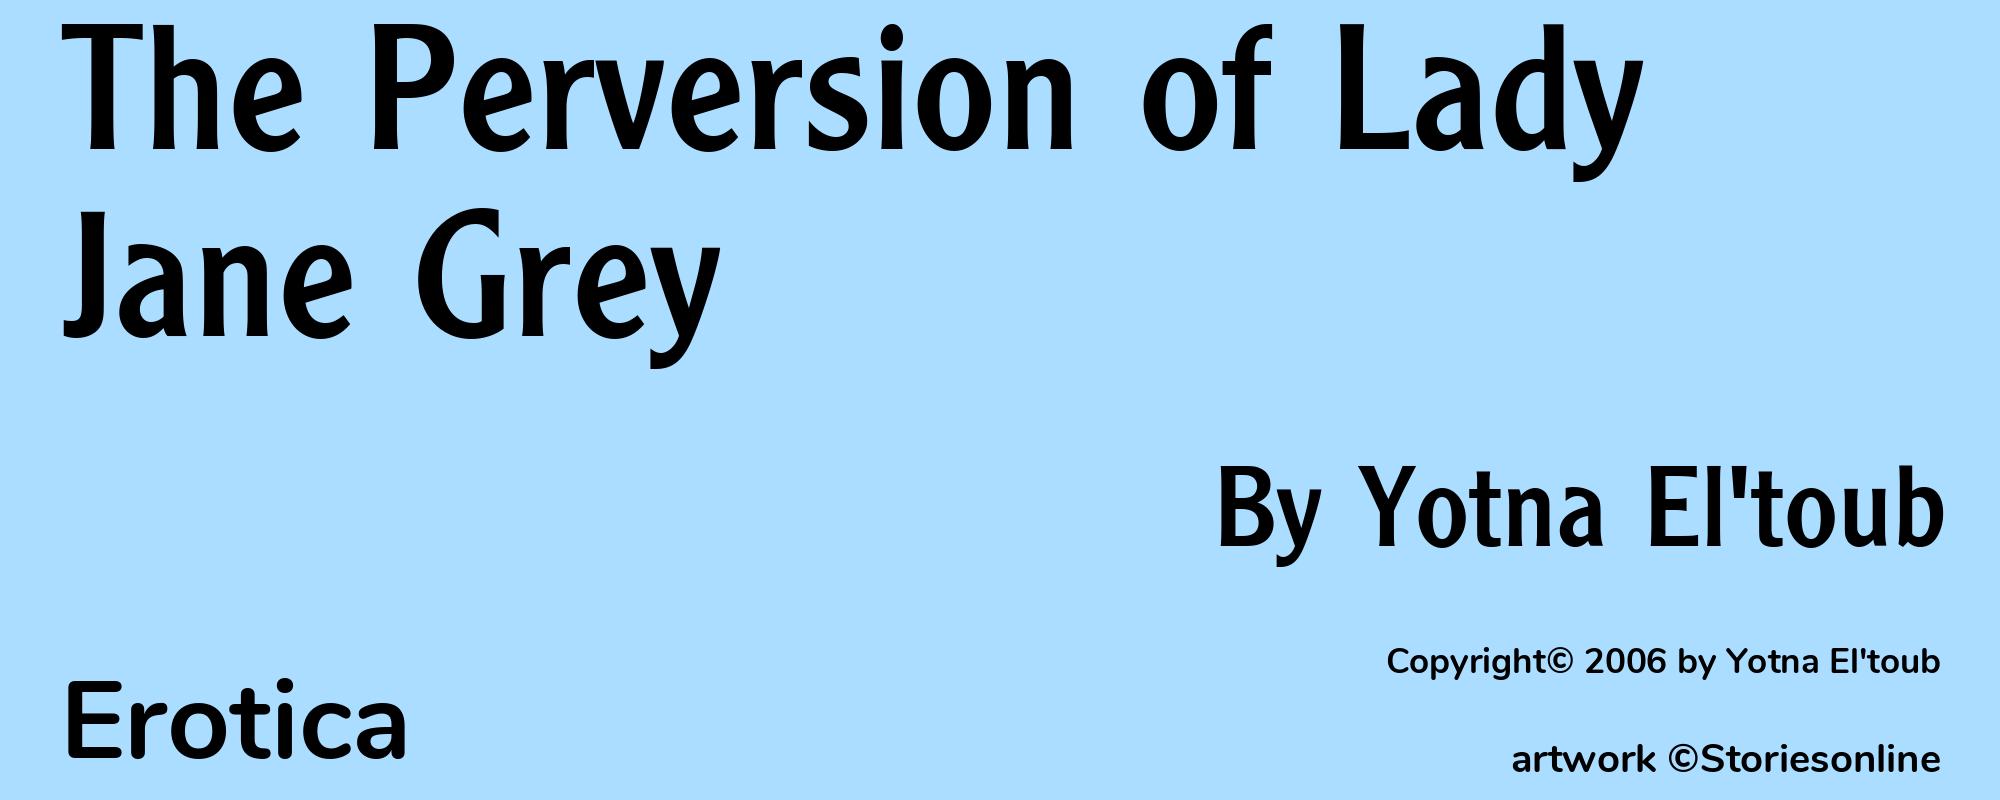 The Perversion of Lady Jane Grey - Cover